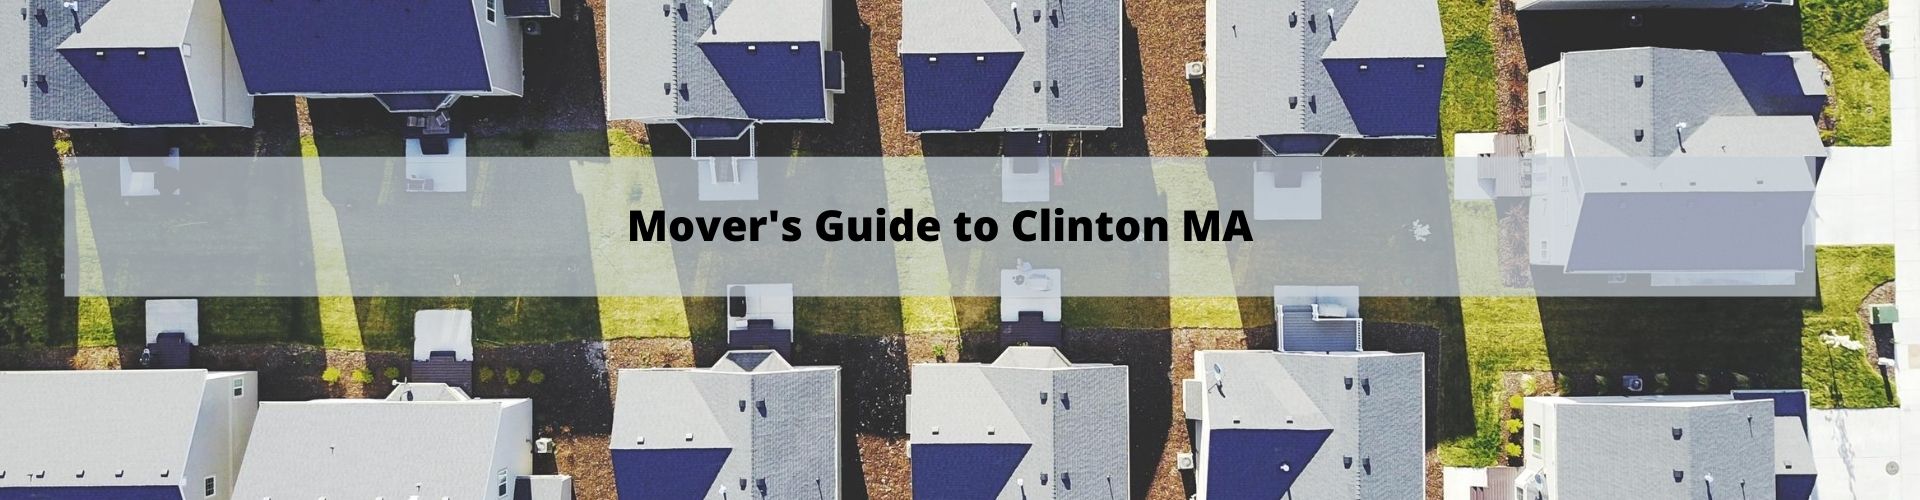 Movers Guide to Clinton MA